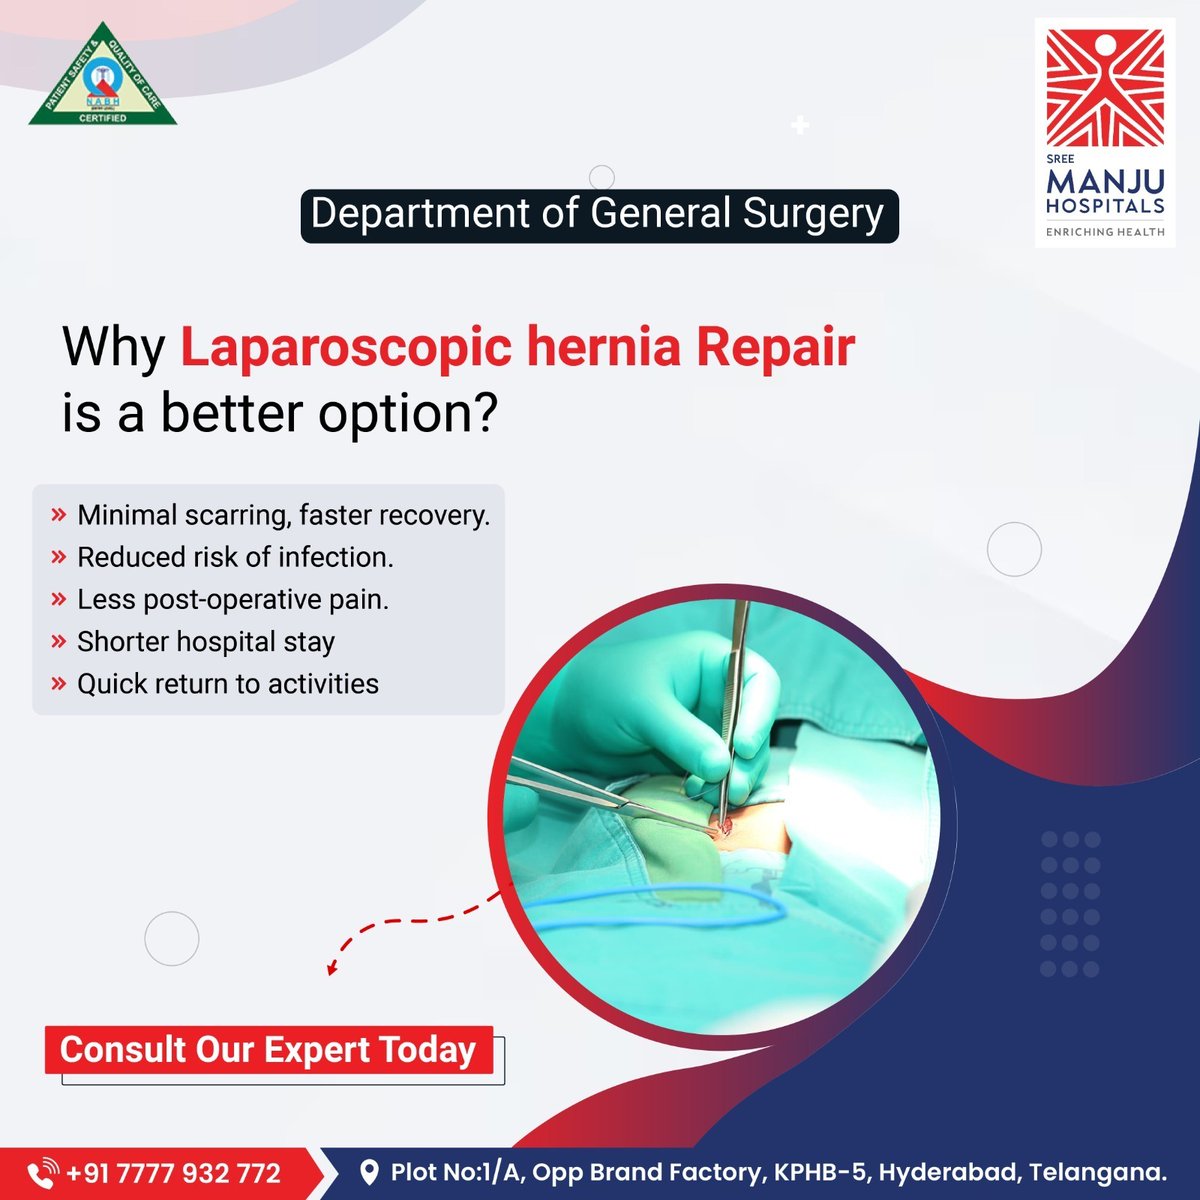 Experience the transformative benefits of laparoscopic hernia repair at the Department of General Surgery in Sree Manju Hospitals. Discover why this innovative approach stands out as the superior choice for hernia treatment.

#generalsurgery #LaparoscopicHernia #MinimalScarring